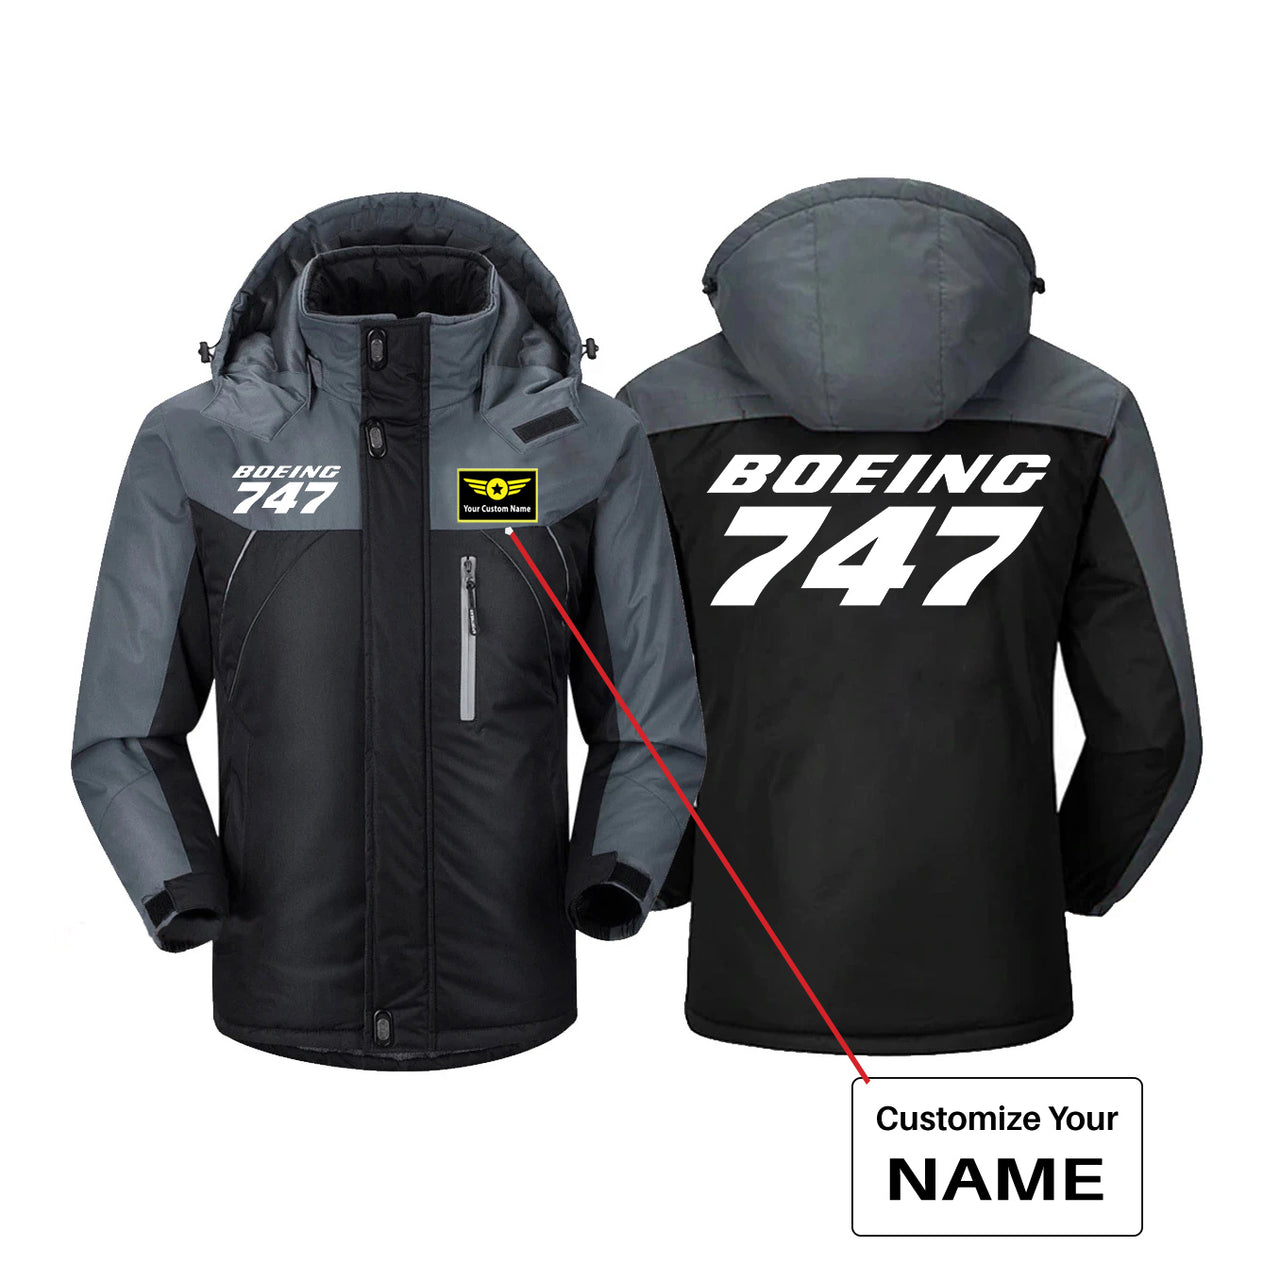 Boeing 747 & Text Designed Thick Winter Jackets